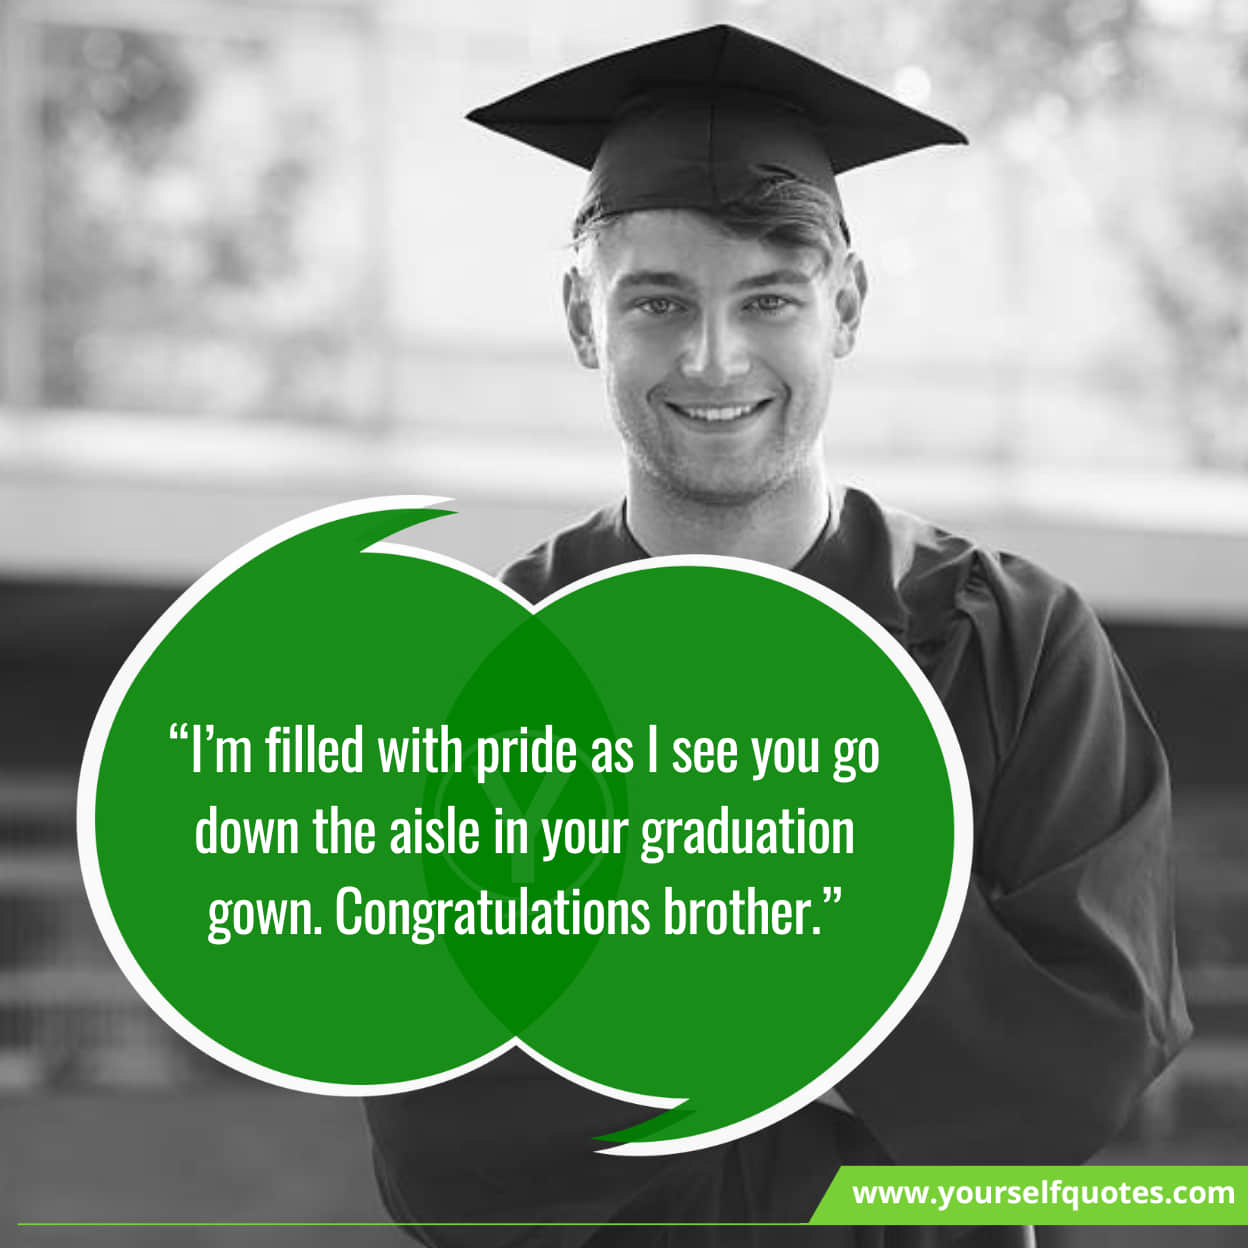 Graduation Wishes Sayings For Brother